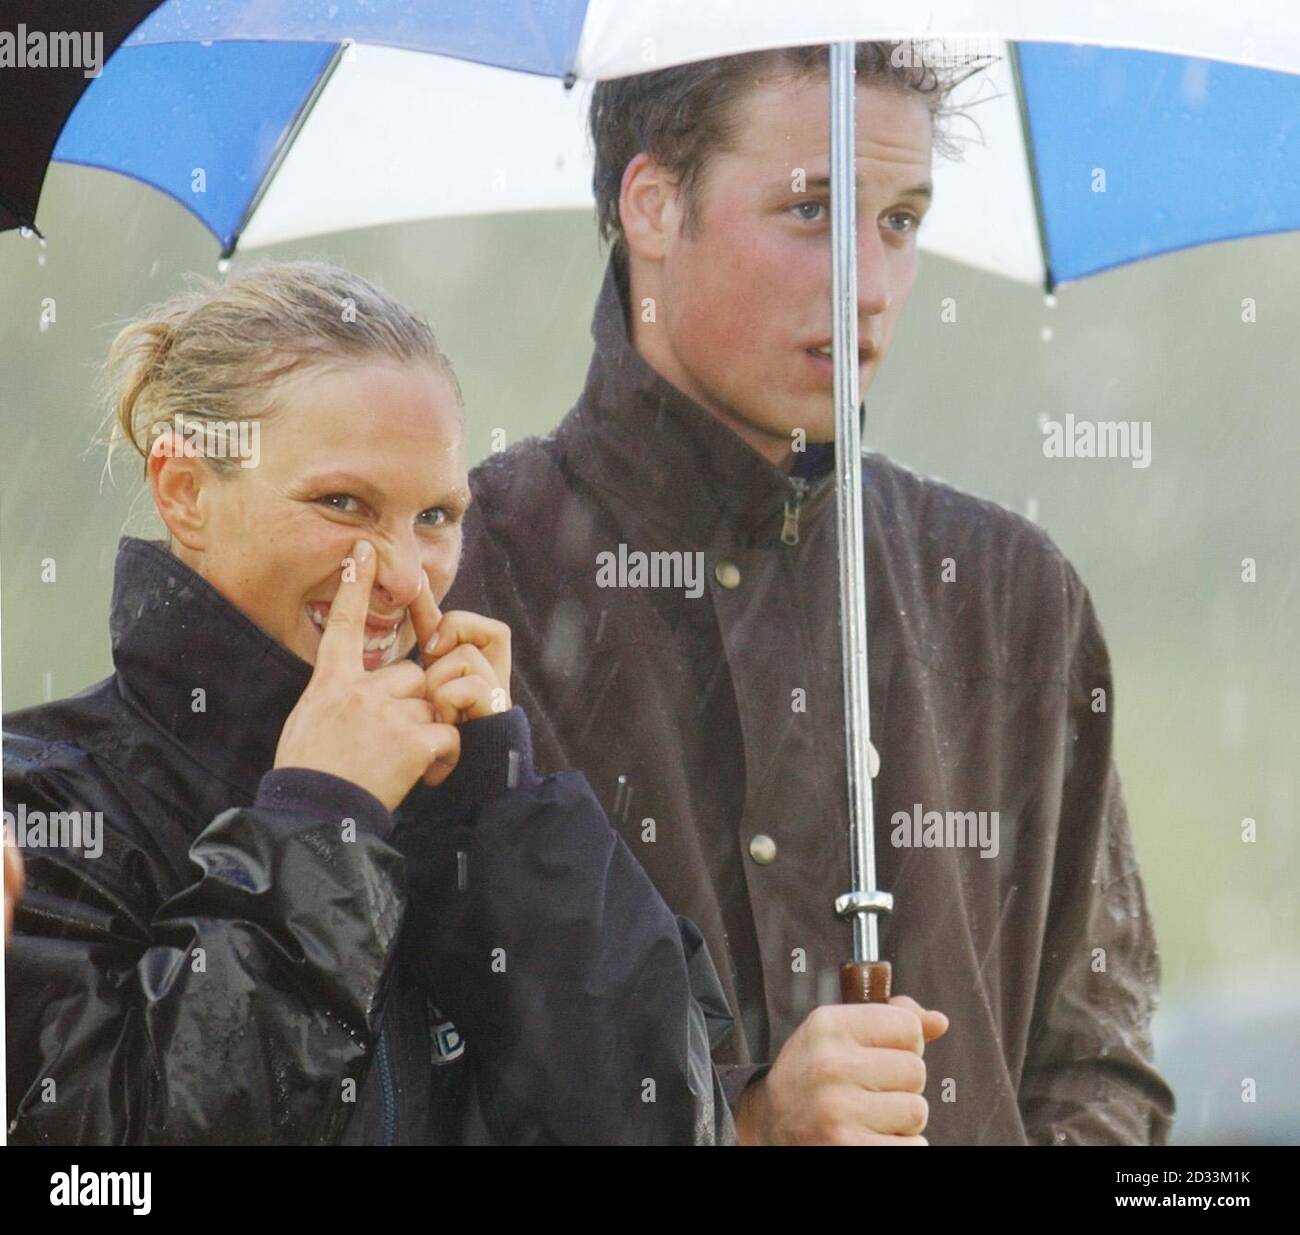 Zara Phillips tries to deal with the pouring rain as her cousin Prince  William holds the umbrella during the presentation ceremony of the Indian  Cavalry Officers Polo Trophy at Tidworth Polo Club.